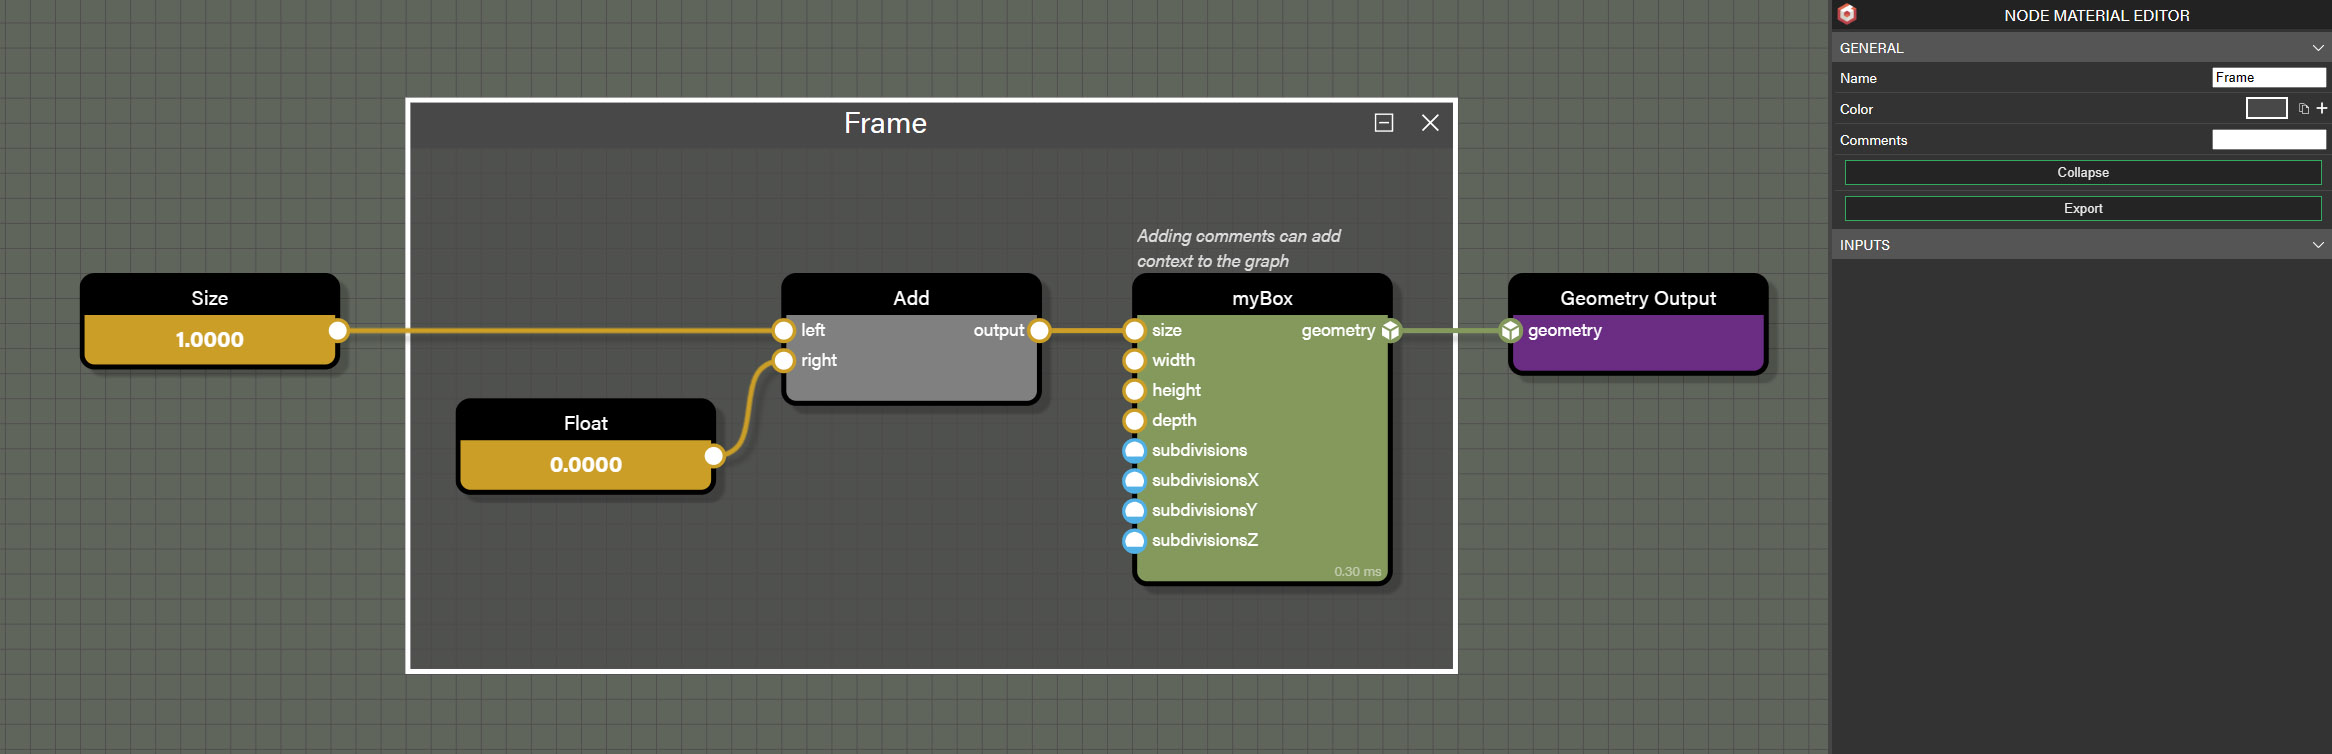 Frames can be drawn around nodes to help visually organize the graph and allow multiple nodes to be moved at once.